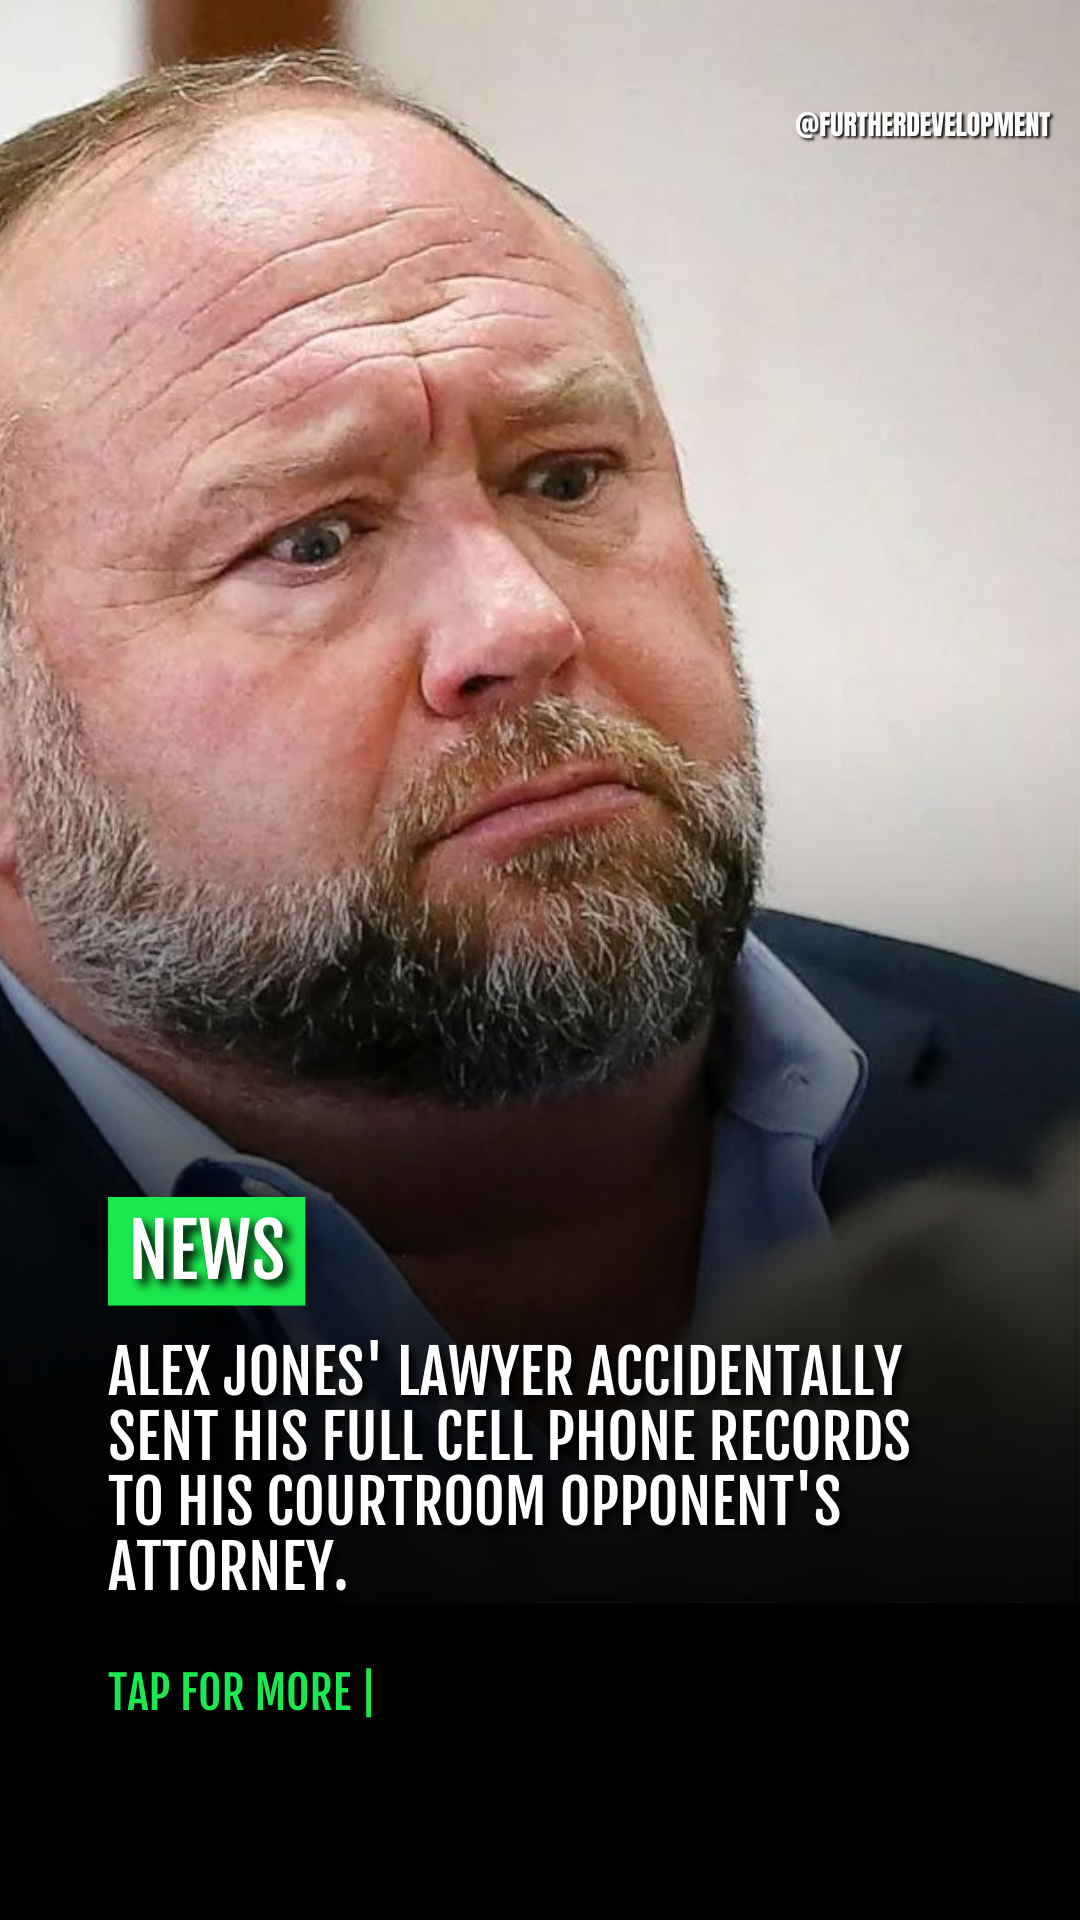 Alex Jones' lawyer accidentally sent his full cell phone records to his courtroom opponent's attorney.